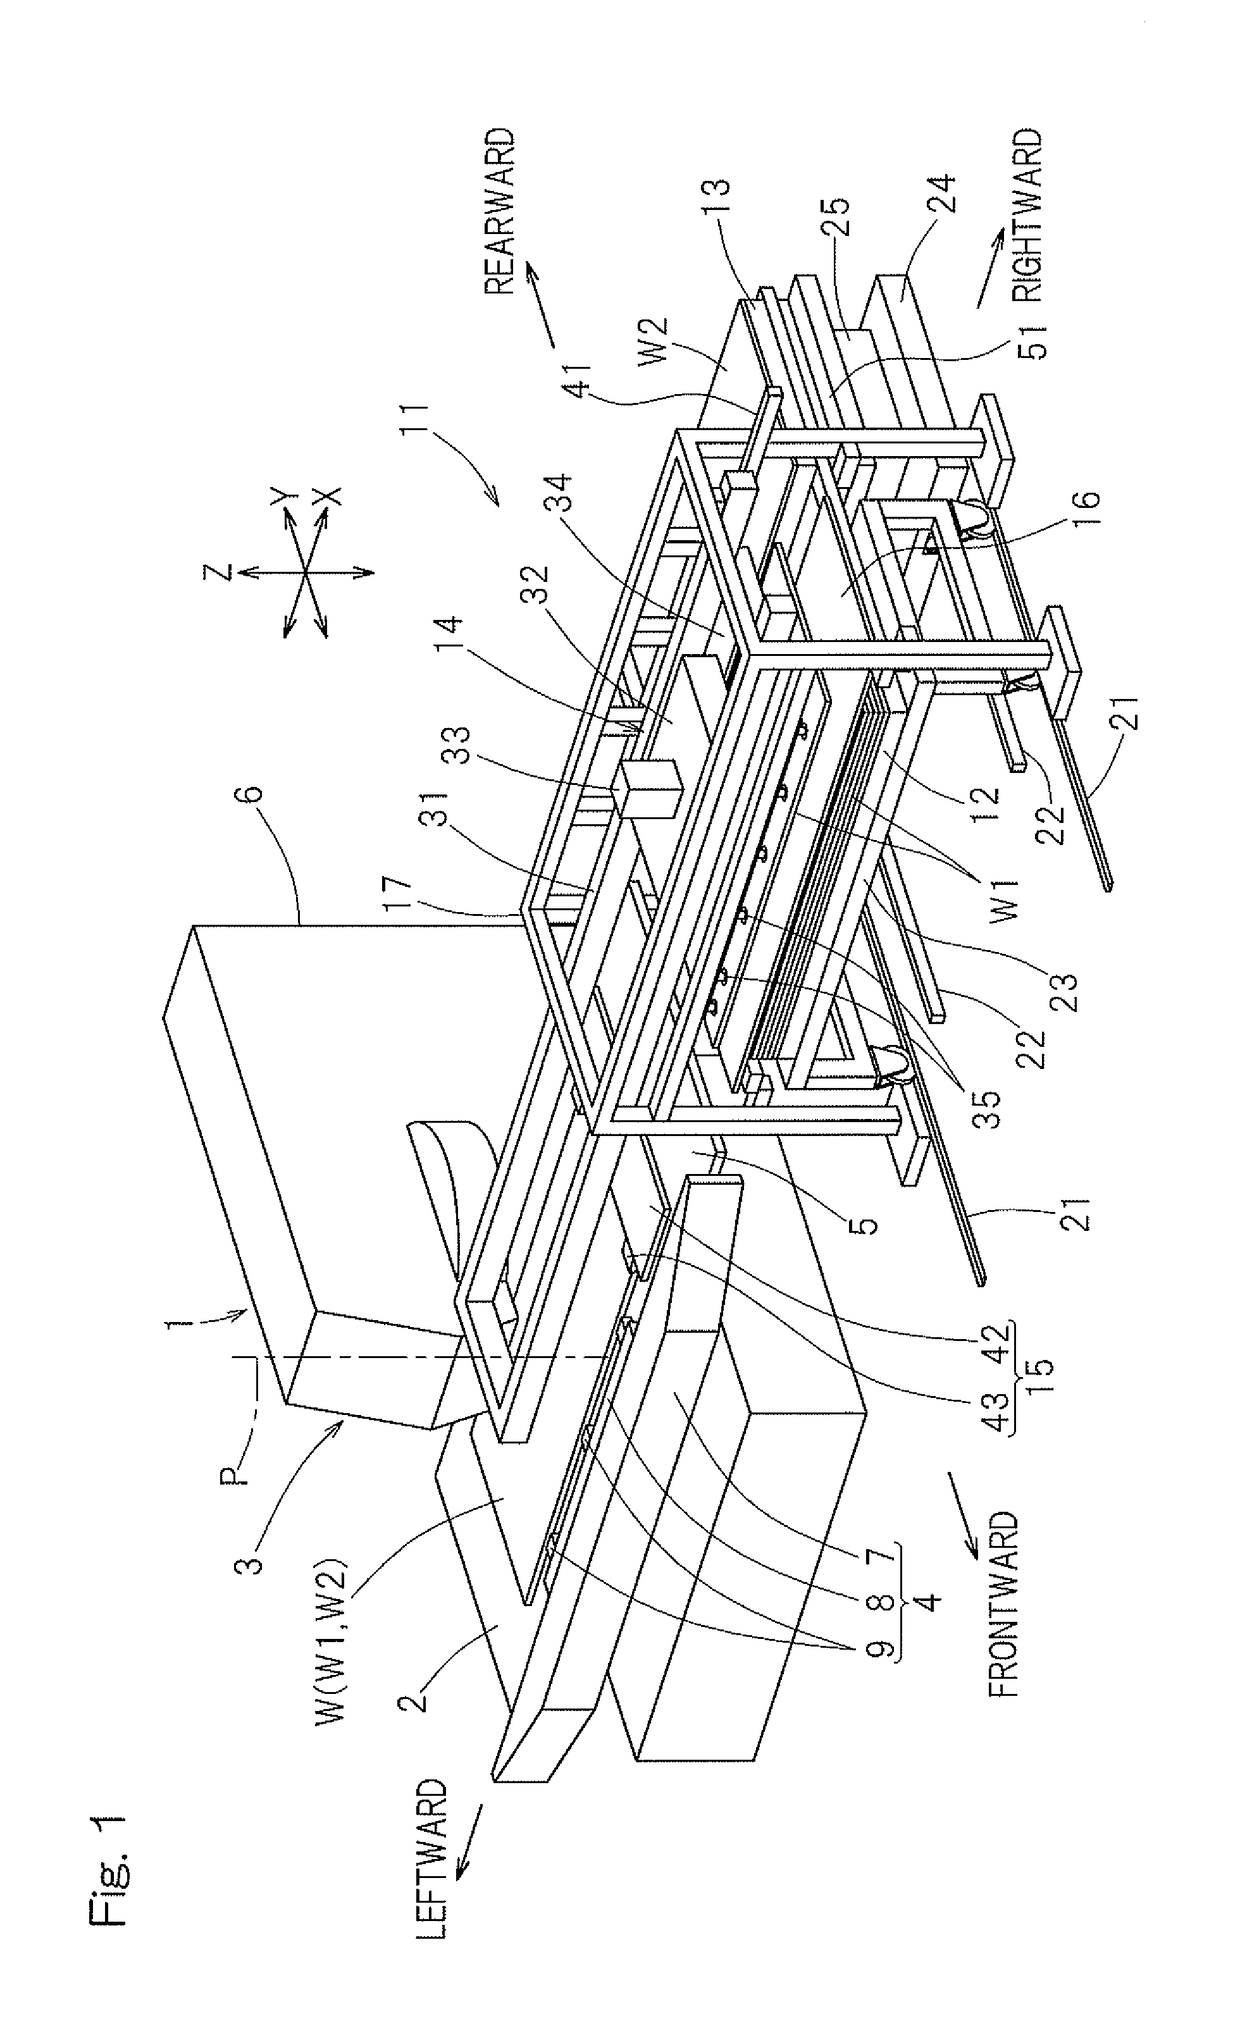 Plate material conveyance apparatus with temporary placement table